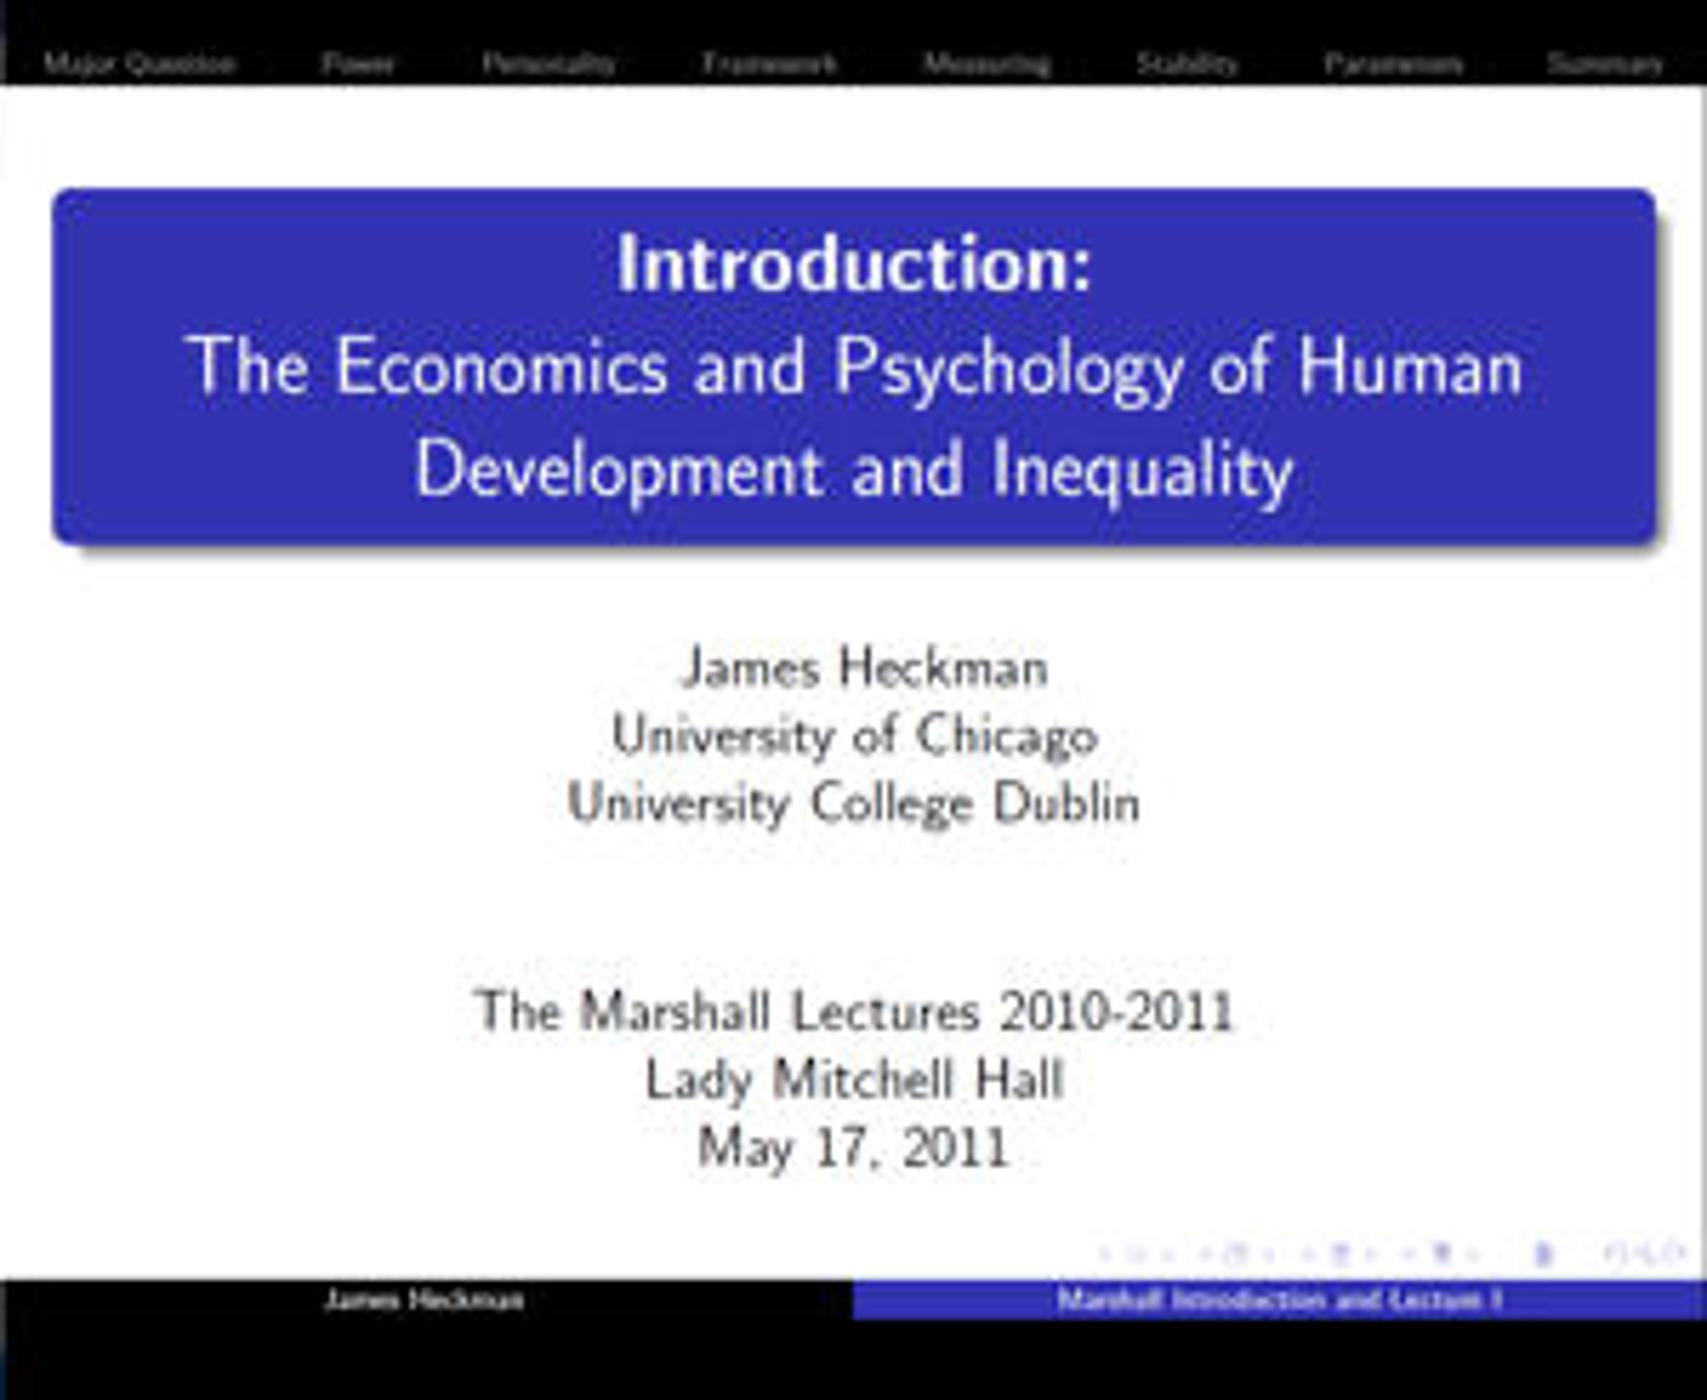 Marshall Lecture 2010-2011 - Professor James Heckman - The economics and psychology of human development and inequality - Lecture 1